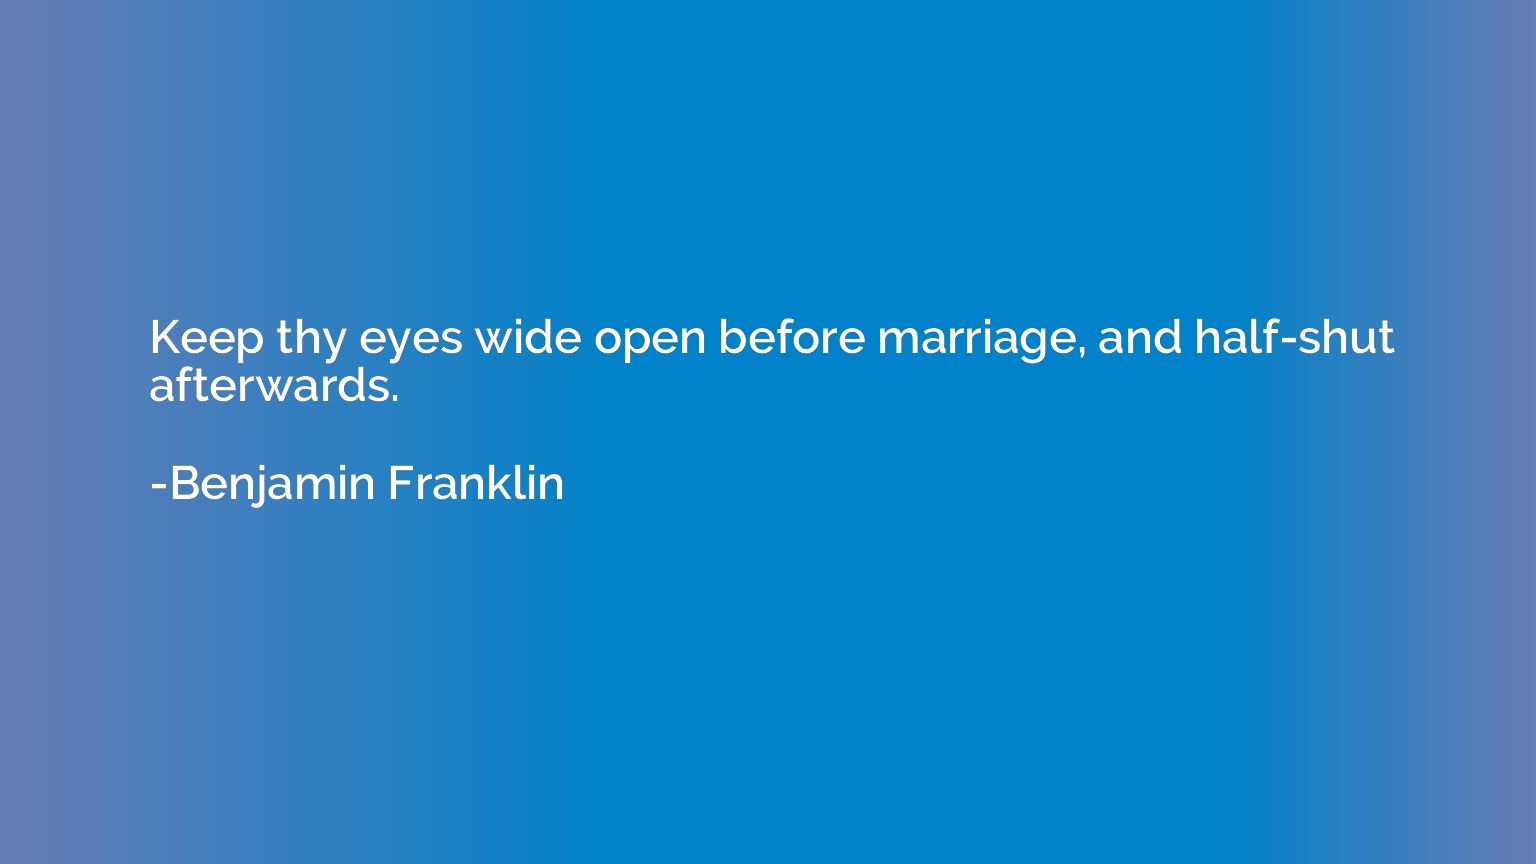 Keep thy eyes wide open before marriage, and half-shut after